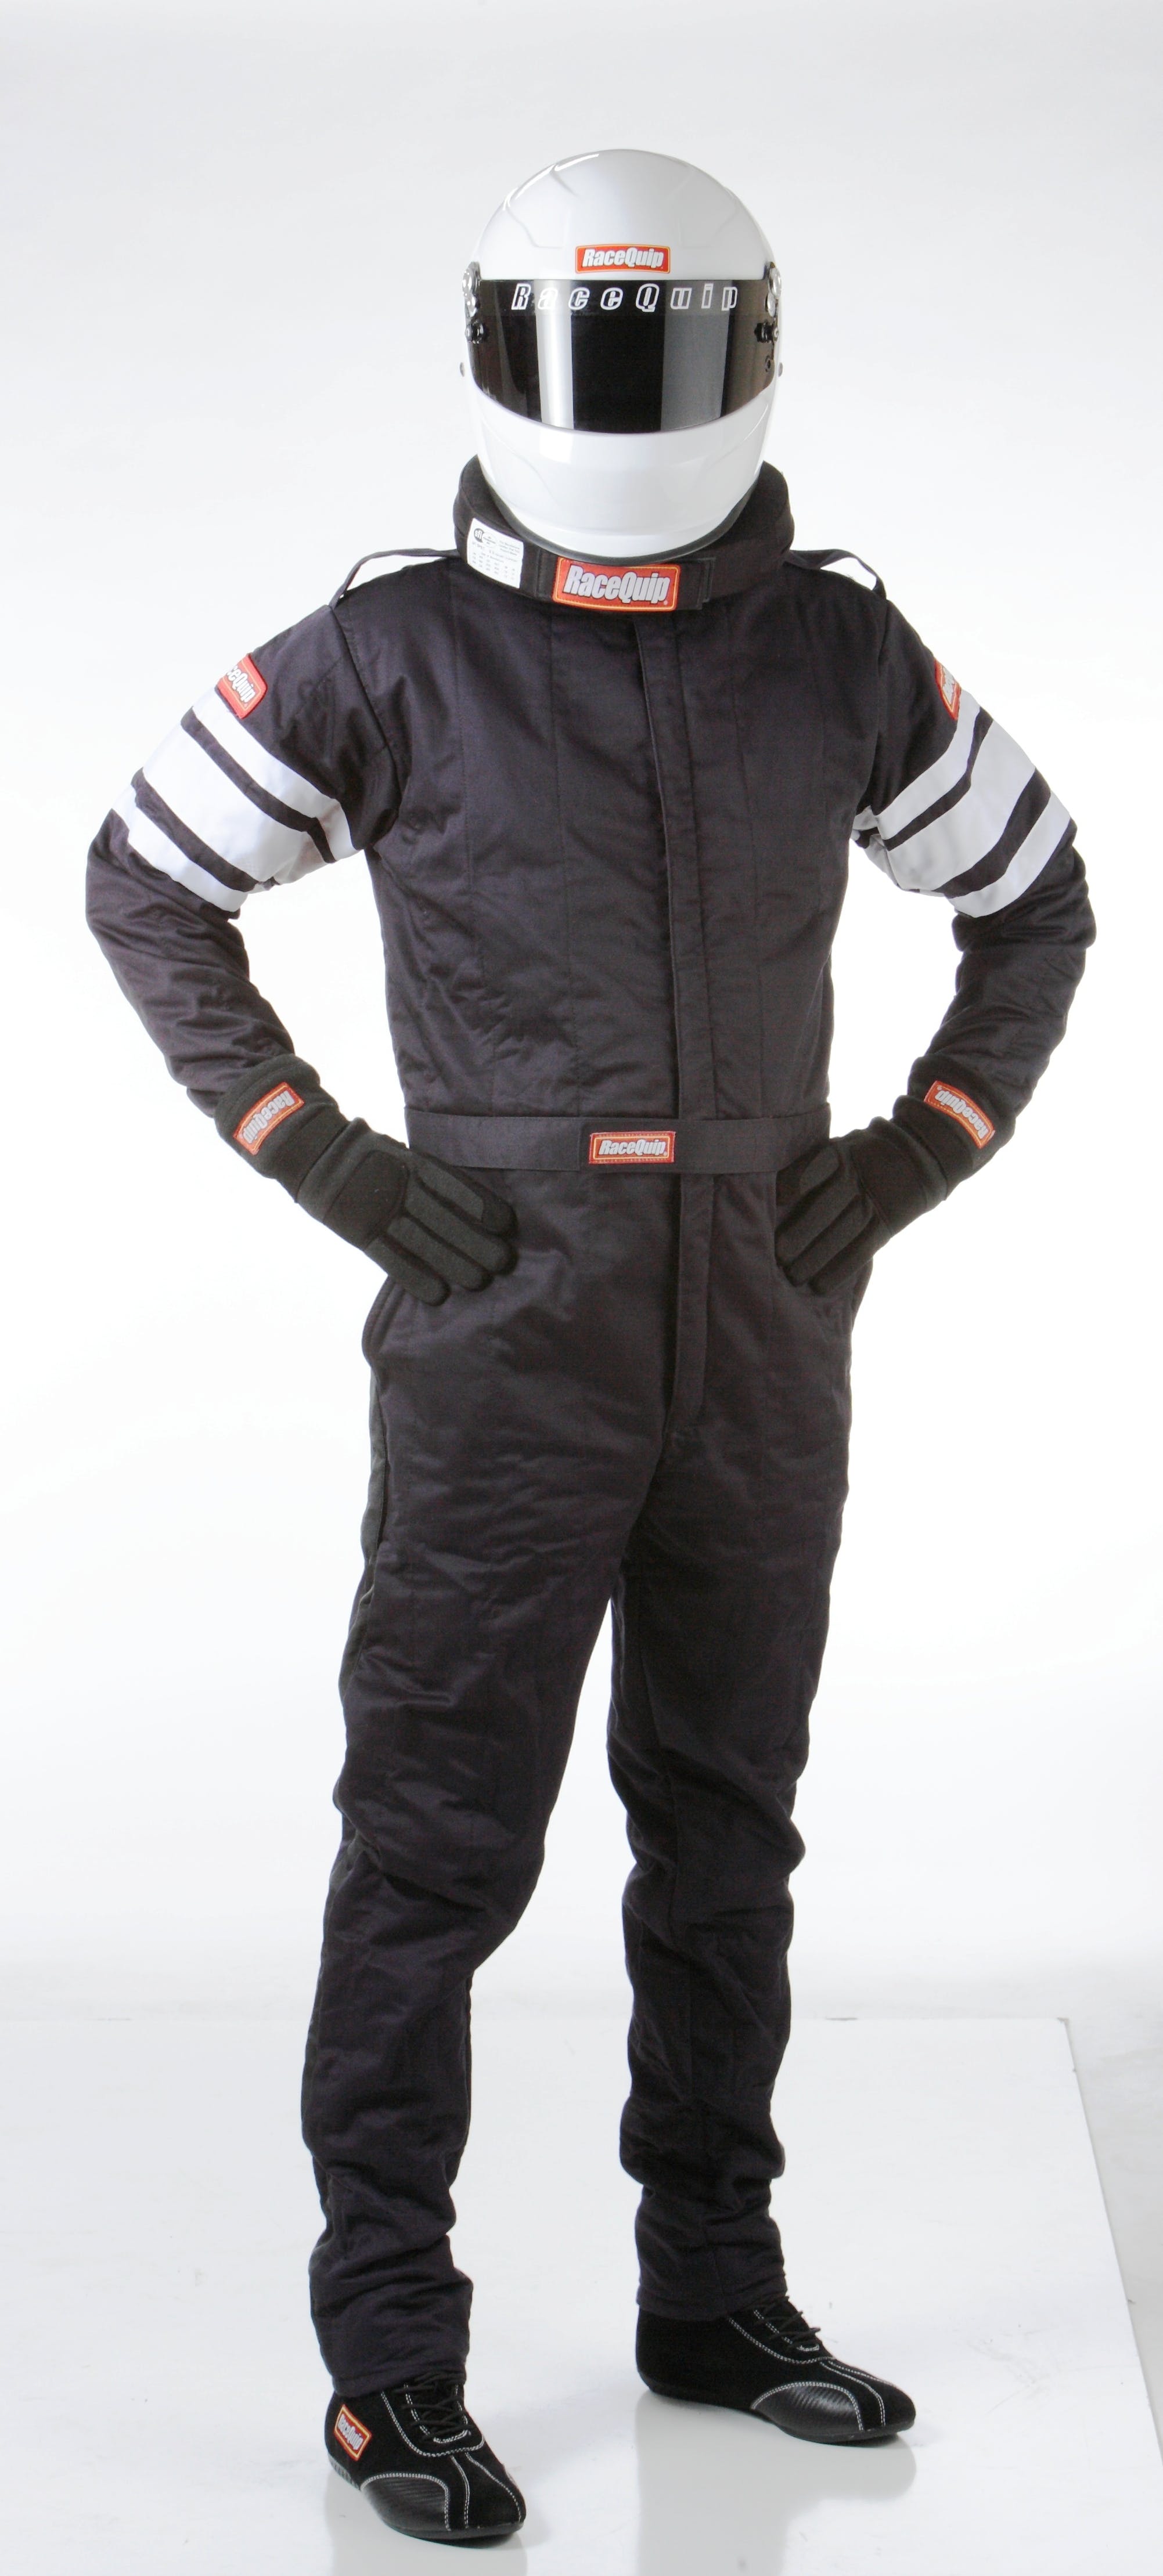 RaceQuip 120002 SFI-5 Pyrovatex One-Piece Multi-Layer Racing Fire Suit (Black, Small)